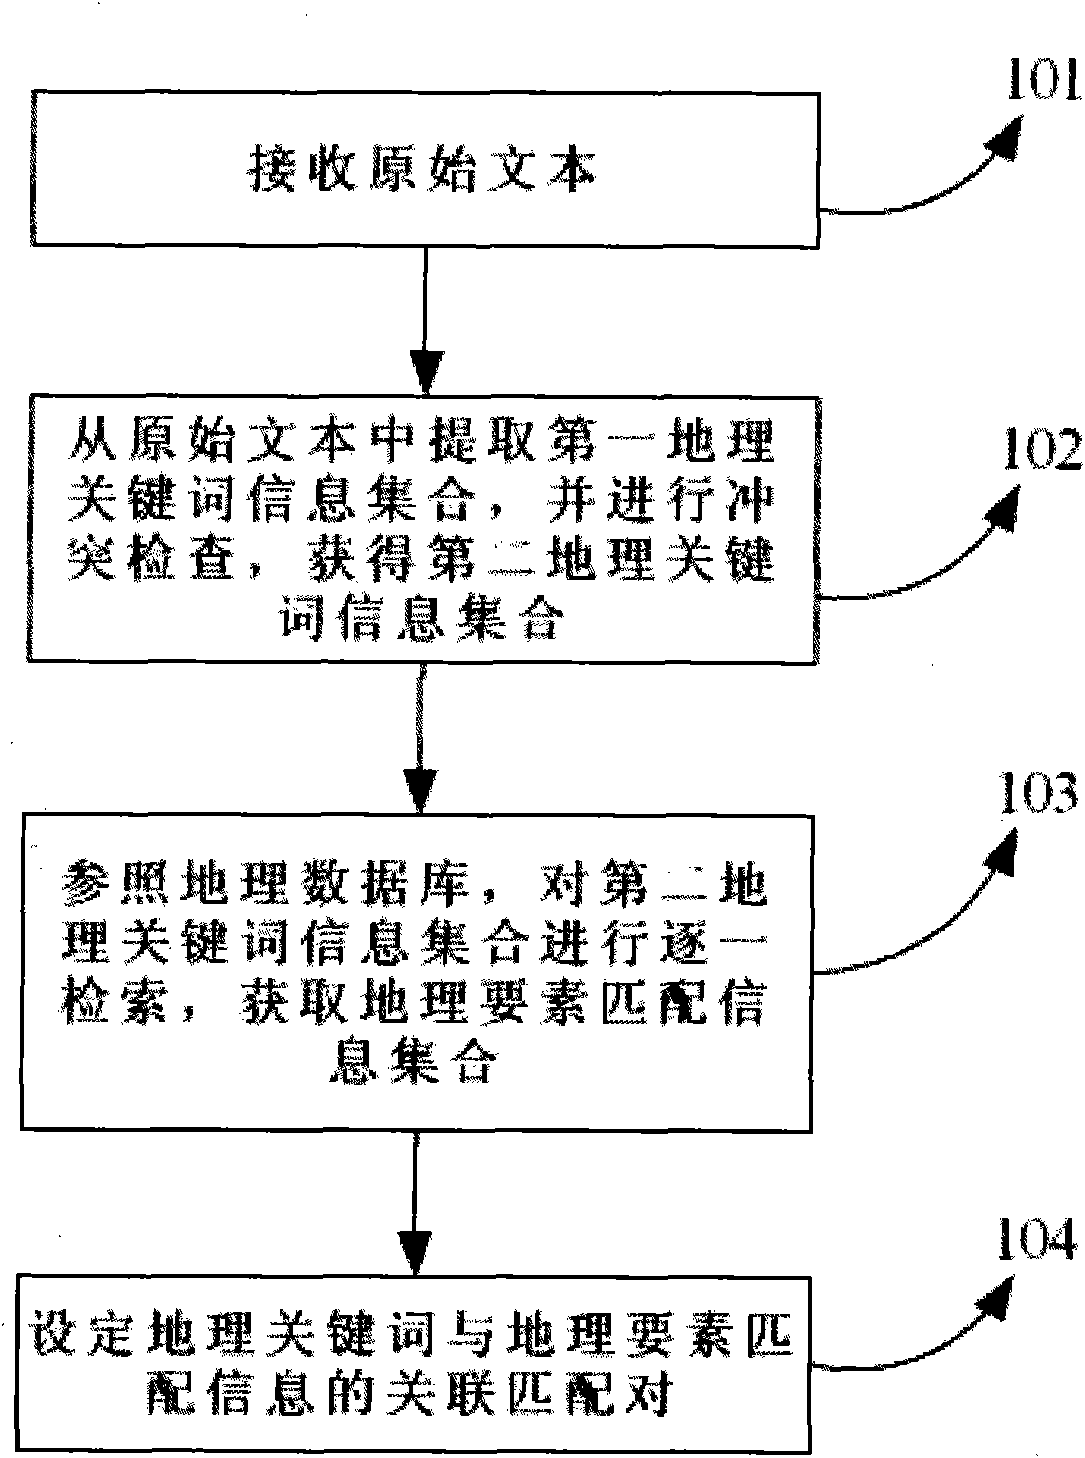 Correlation method of text information and geological information and system